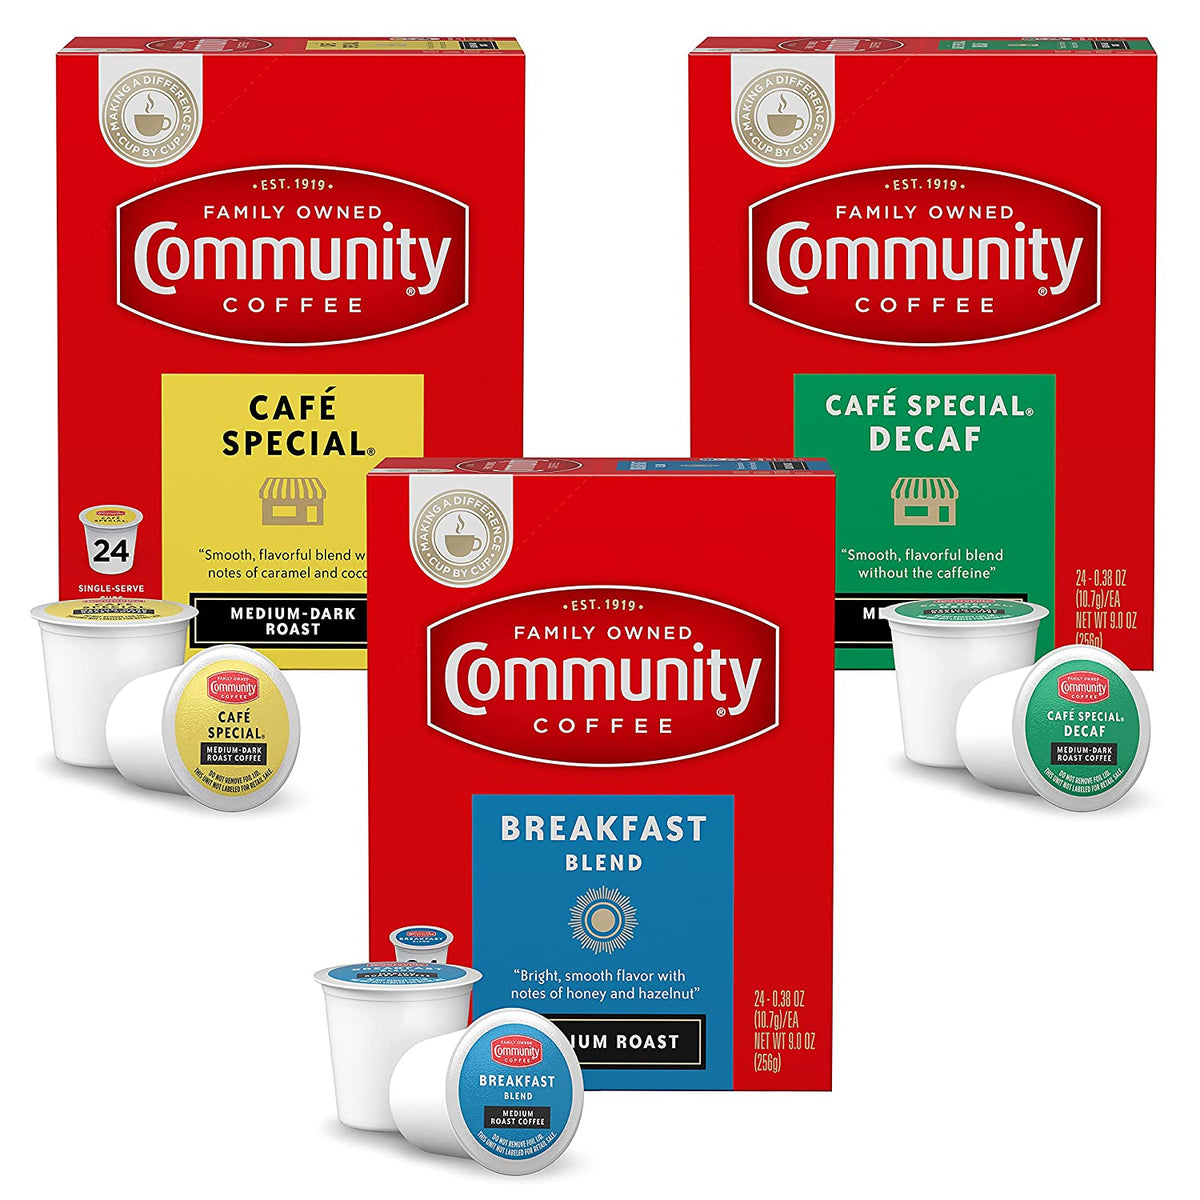 Community Coffee Pecan Praline Flavored 72 Count Coffee Pods